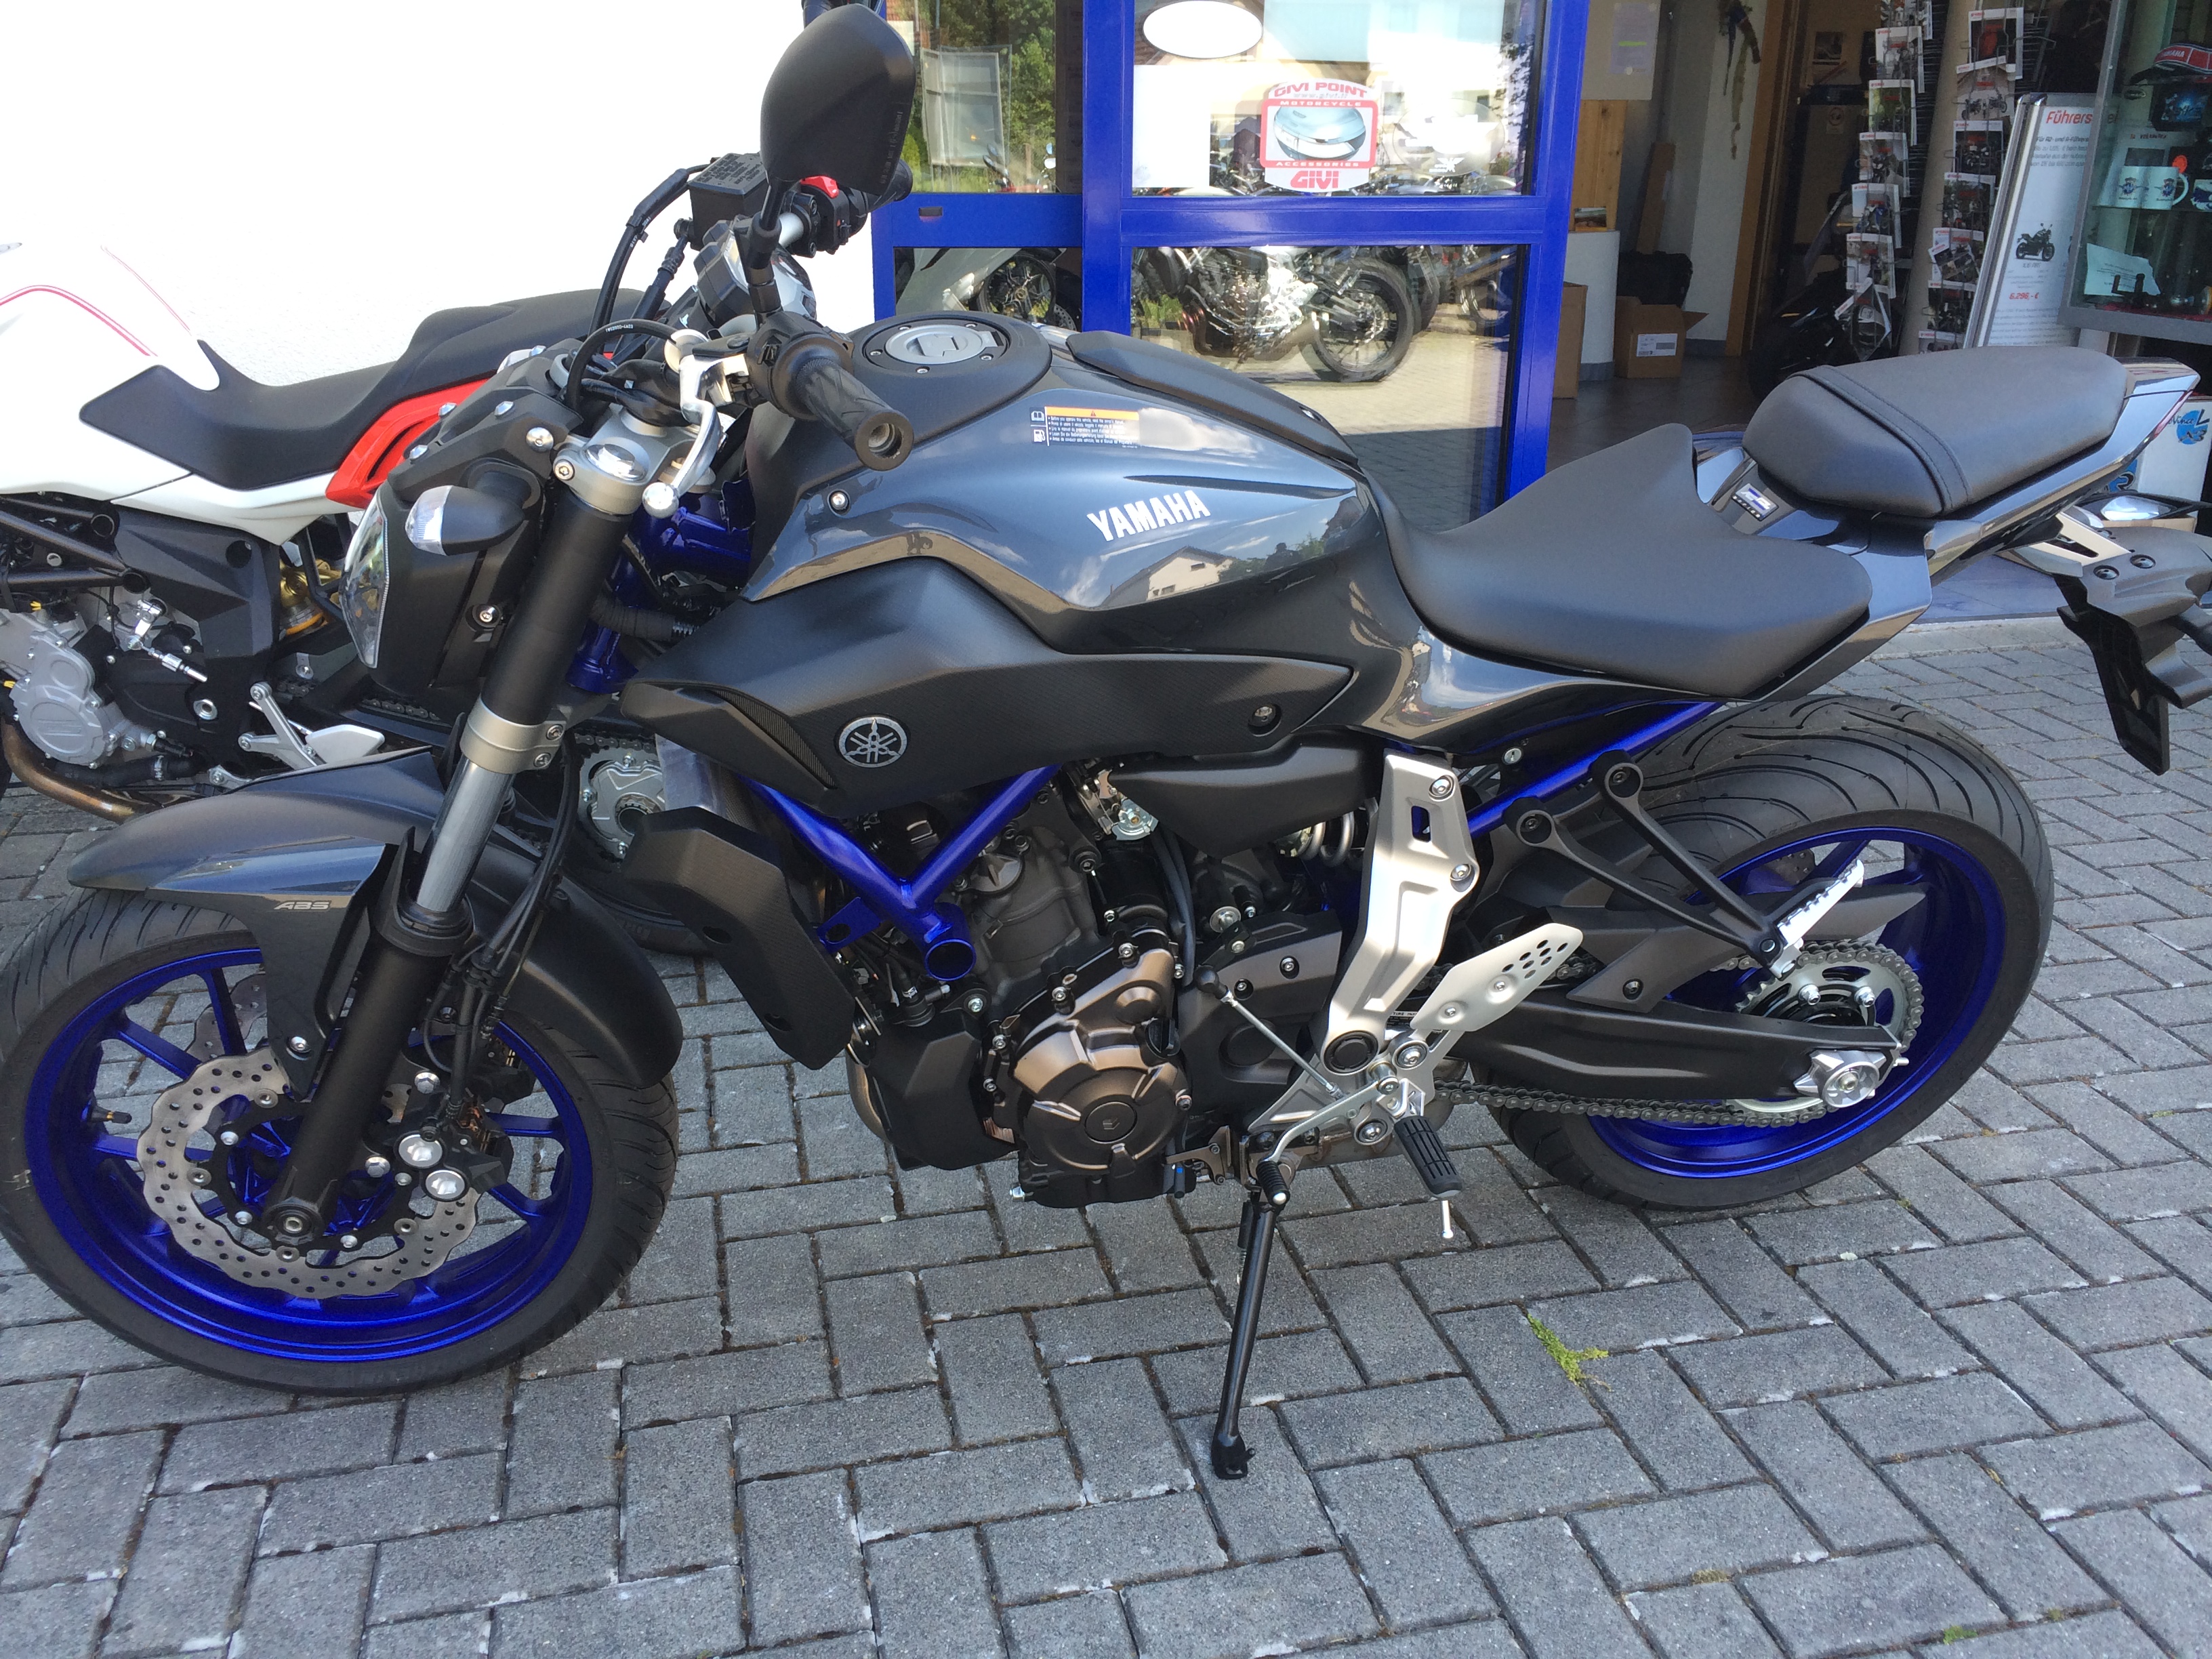 Unsere Gedrosselte:
Yamaha MT 07 ABS